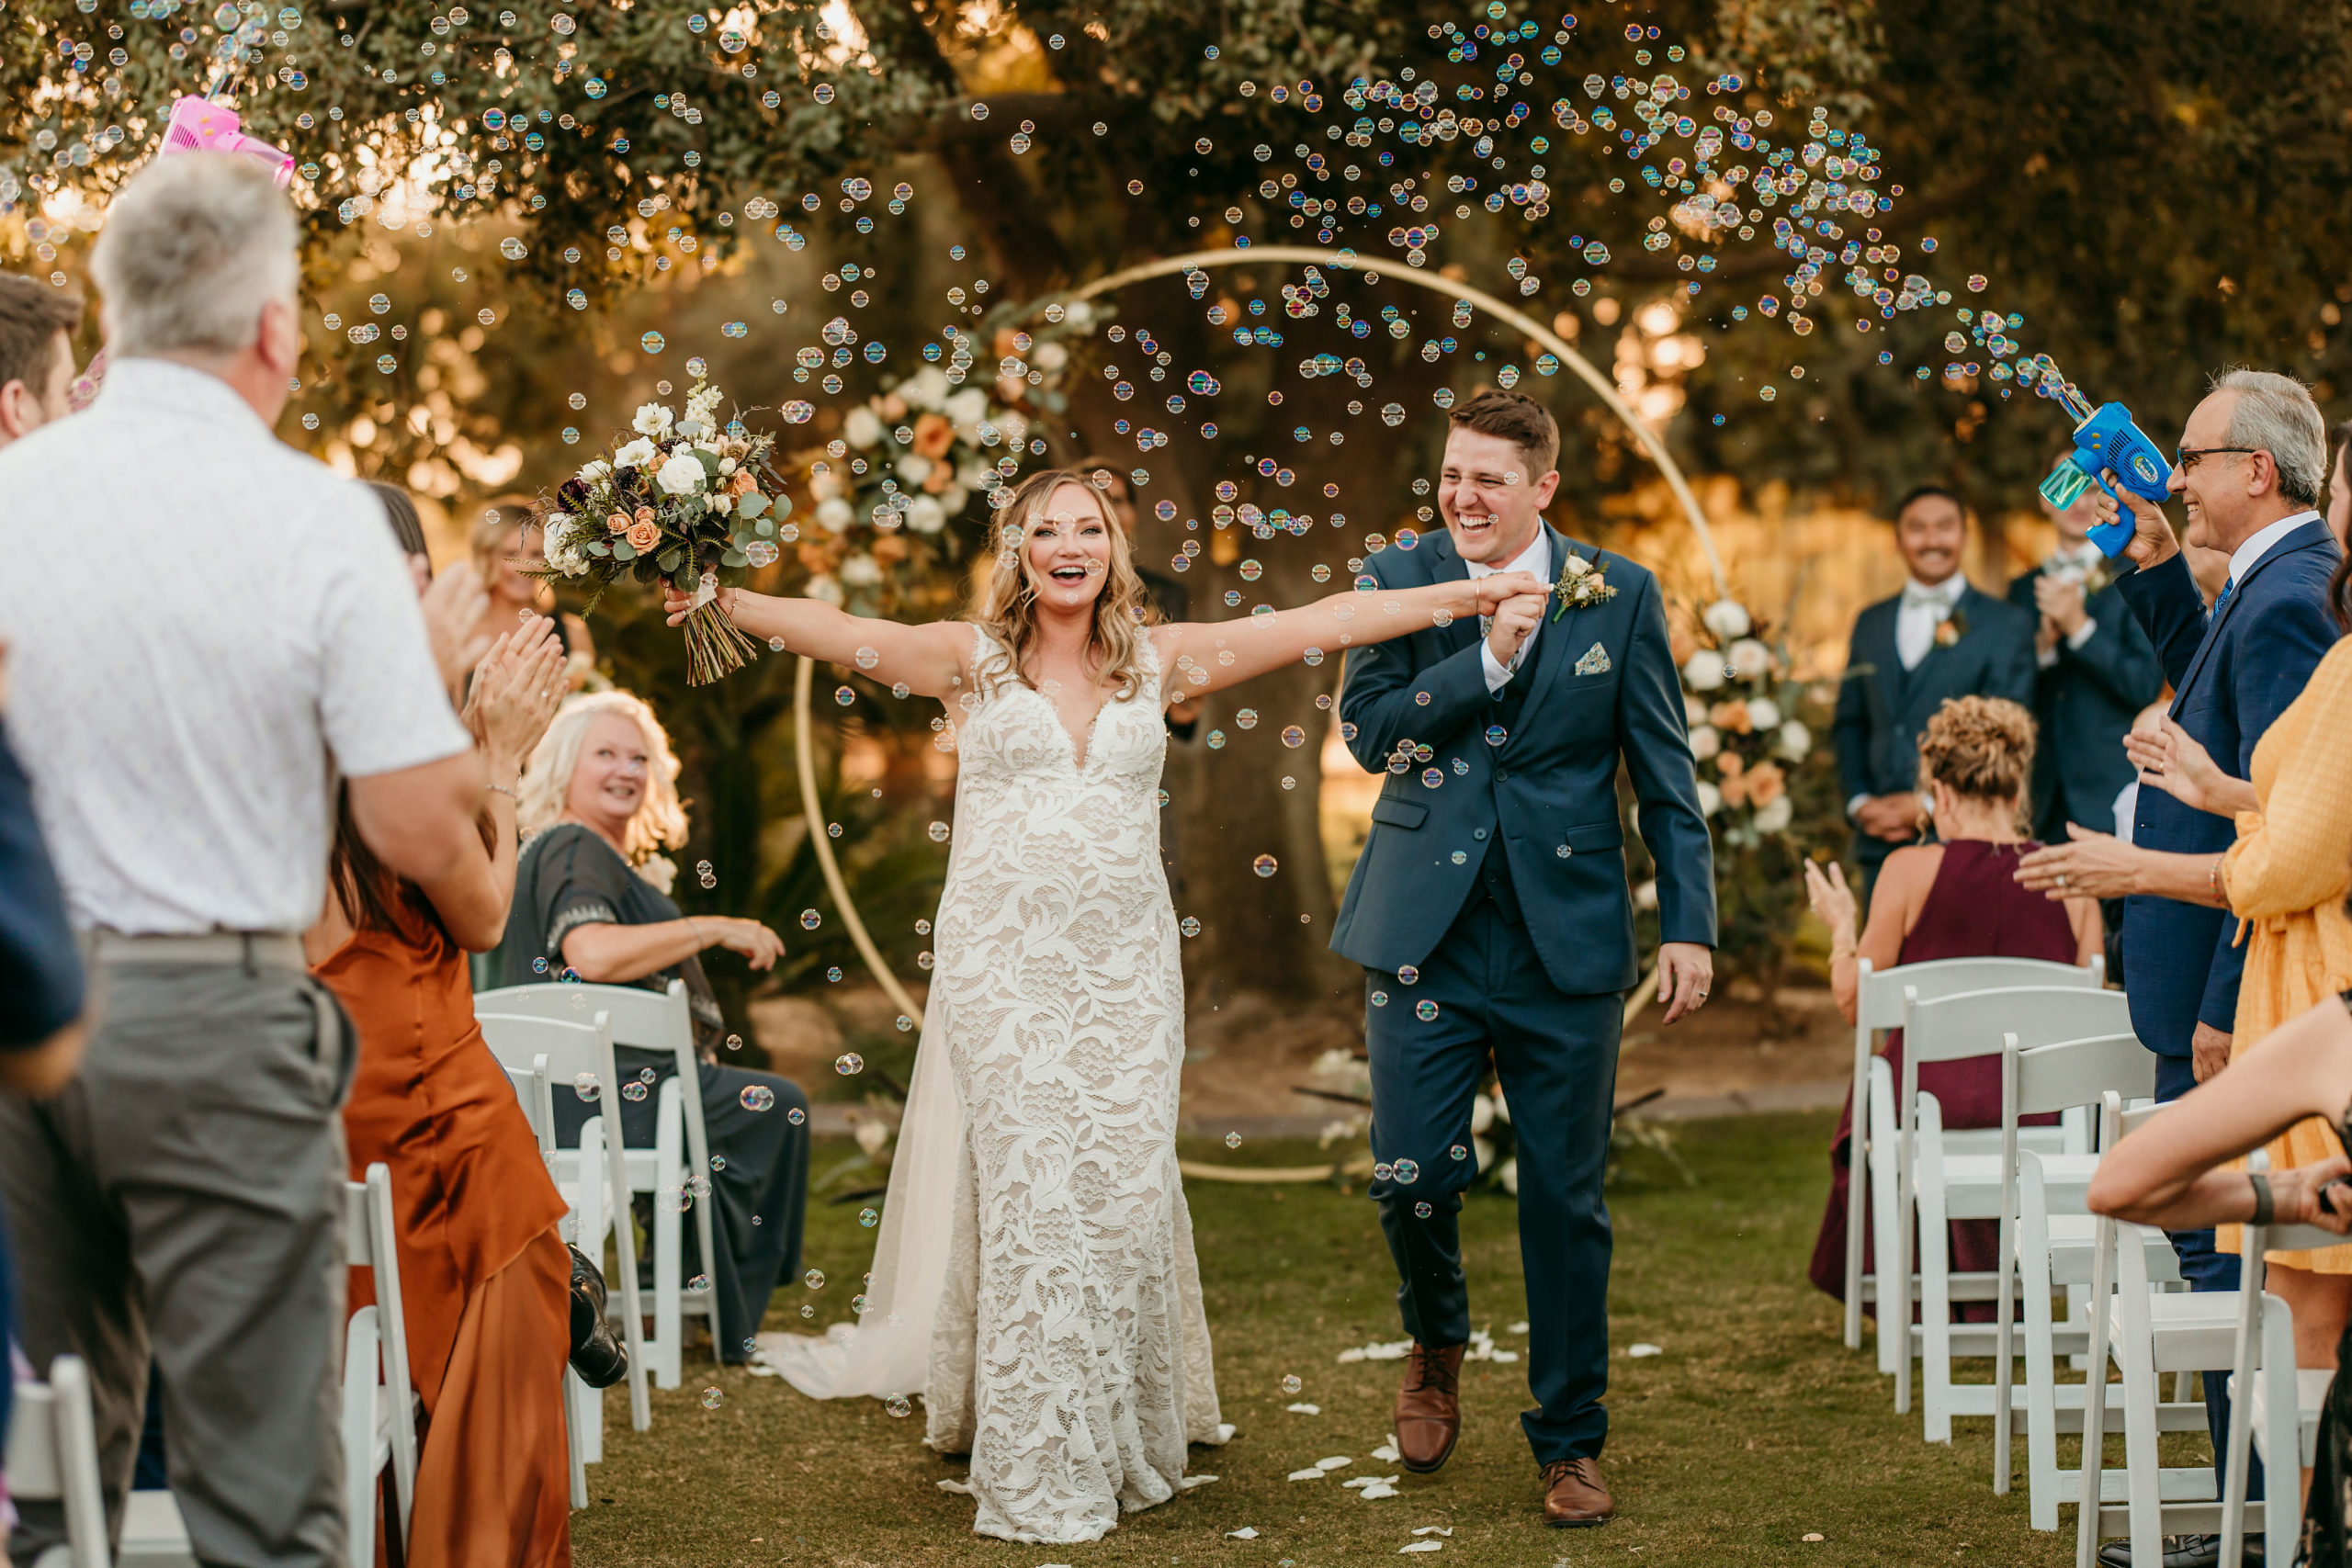 Newly married couple walking back up the aisle through a cloud of glittery bubbles. Bride is cheering with her arms open wide and groom is laughing a joyous laugh.